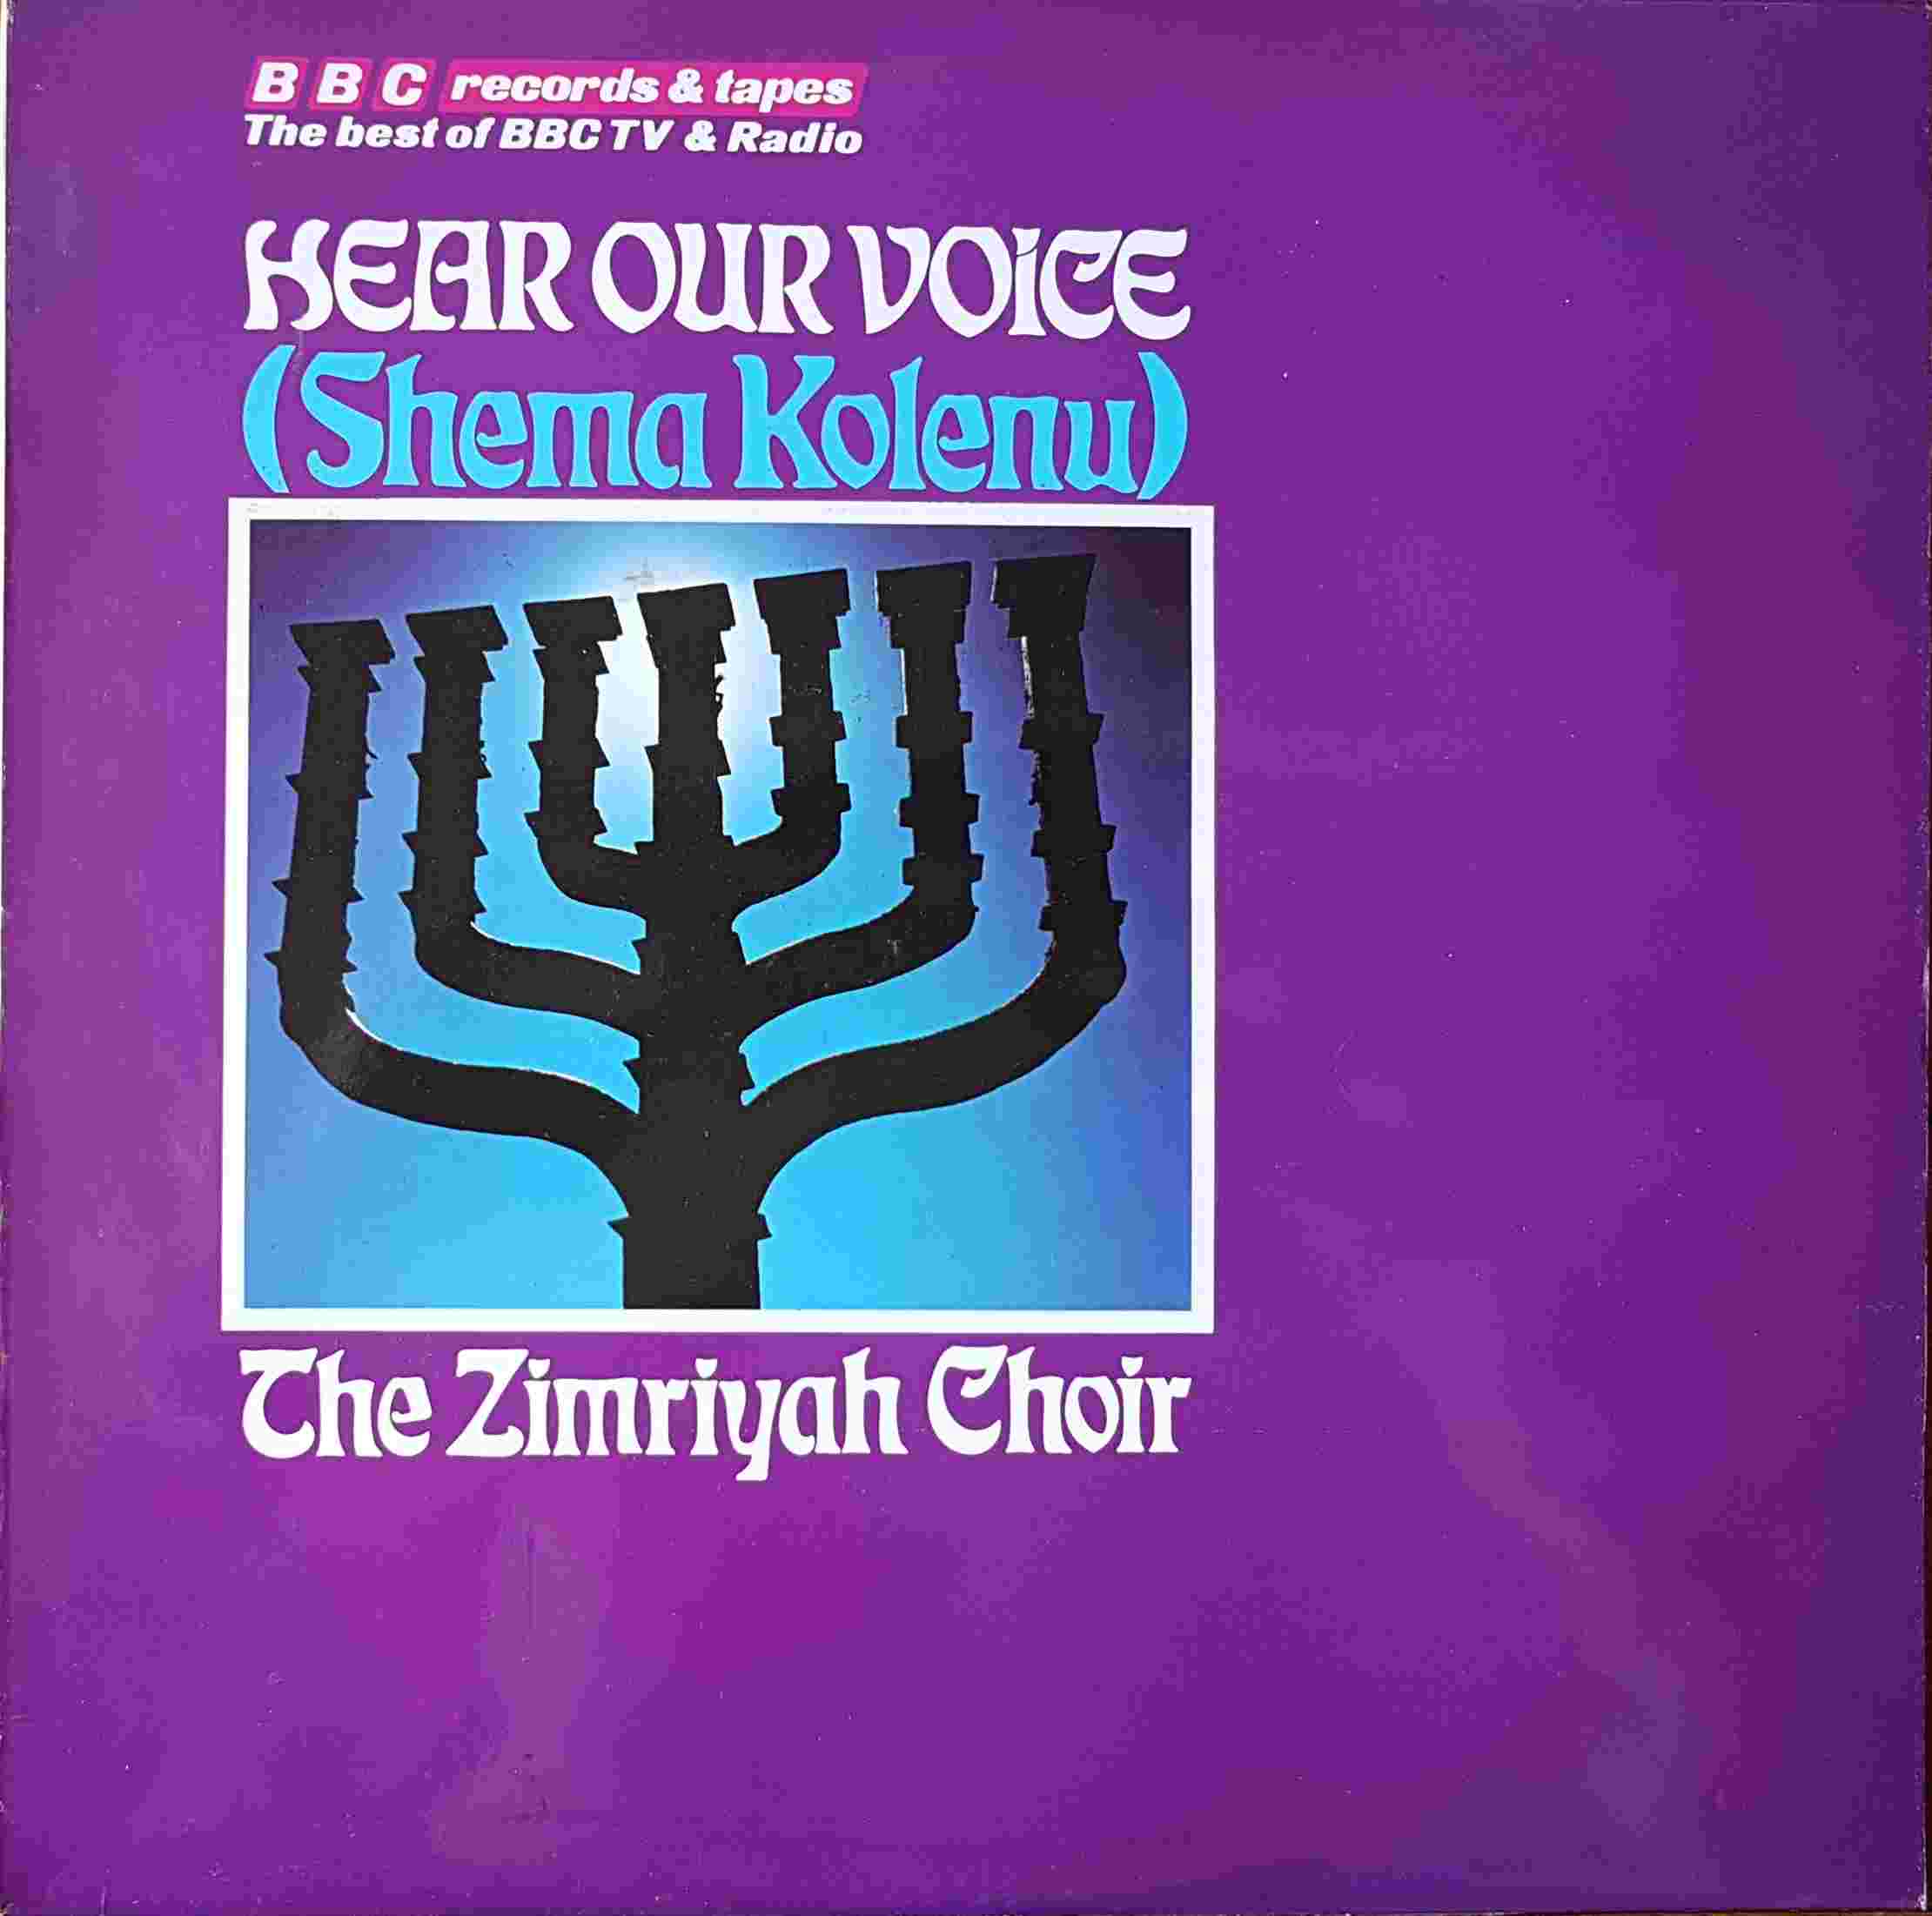 Picture of REC 115 Hear our voices (Shema Kolenu) by artist The Zimriyah Choir from the BBC albums - Records and Tapes library